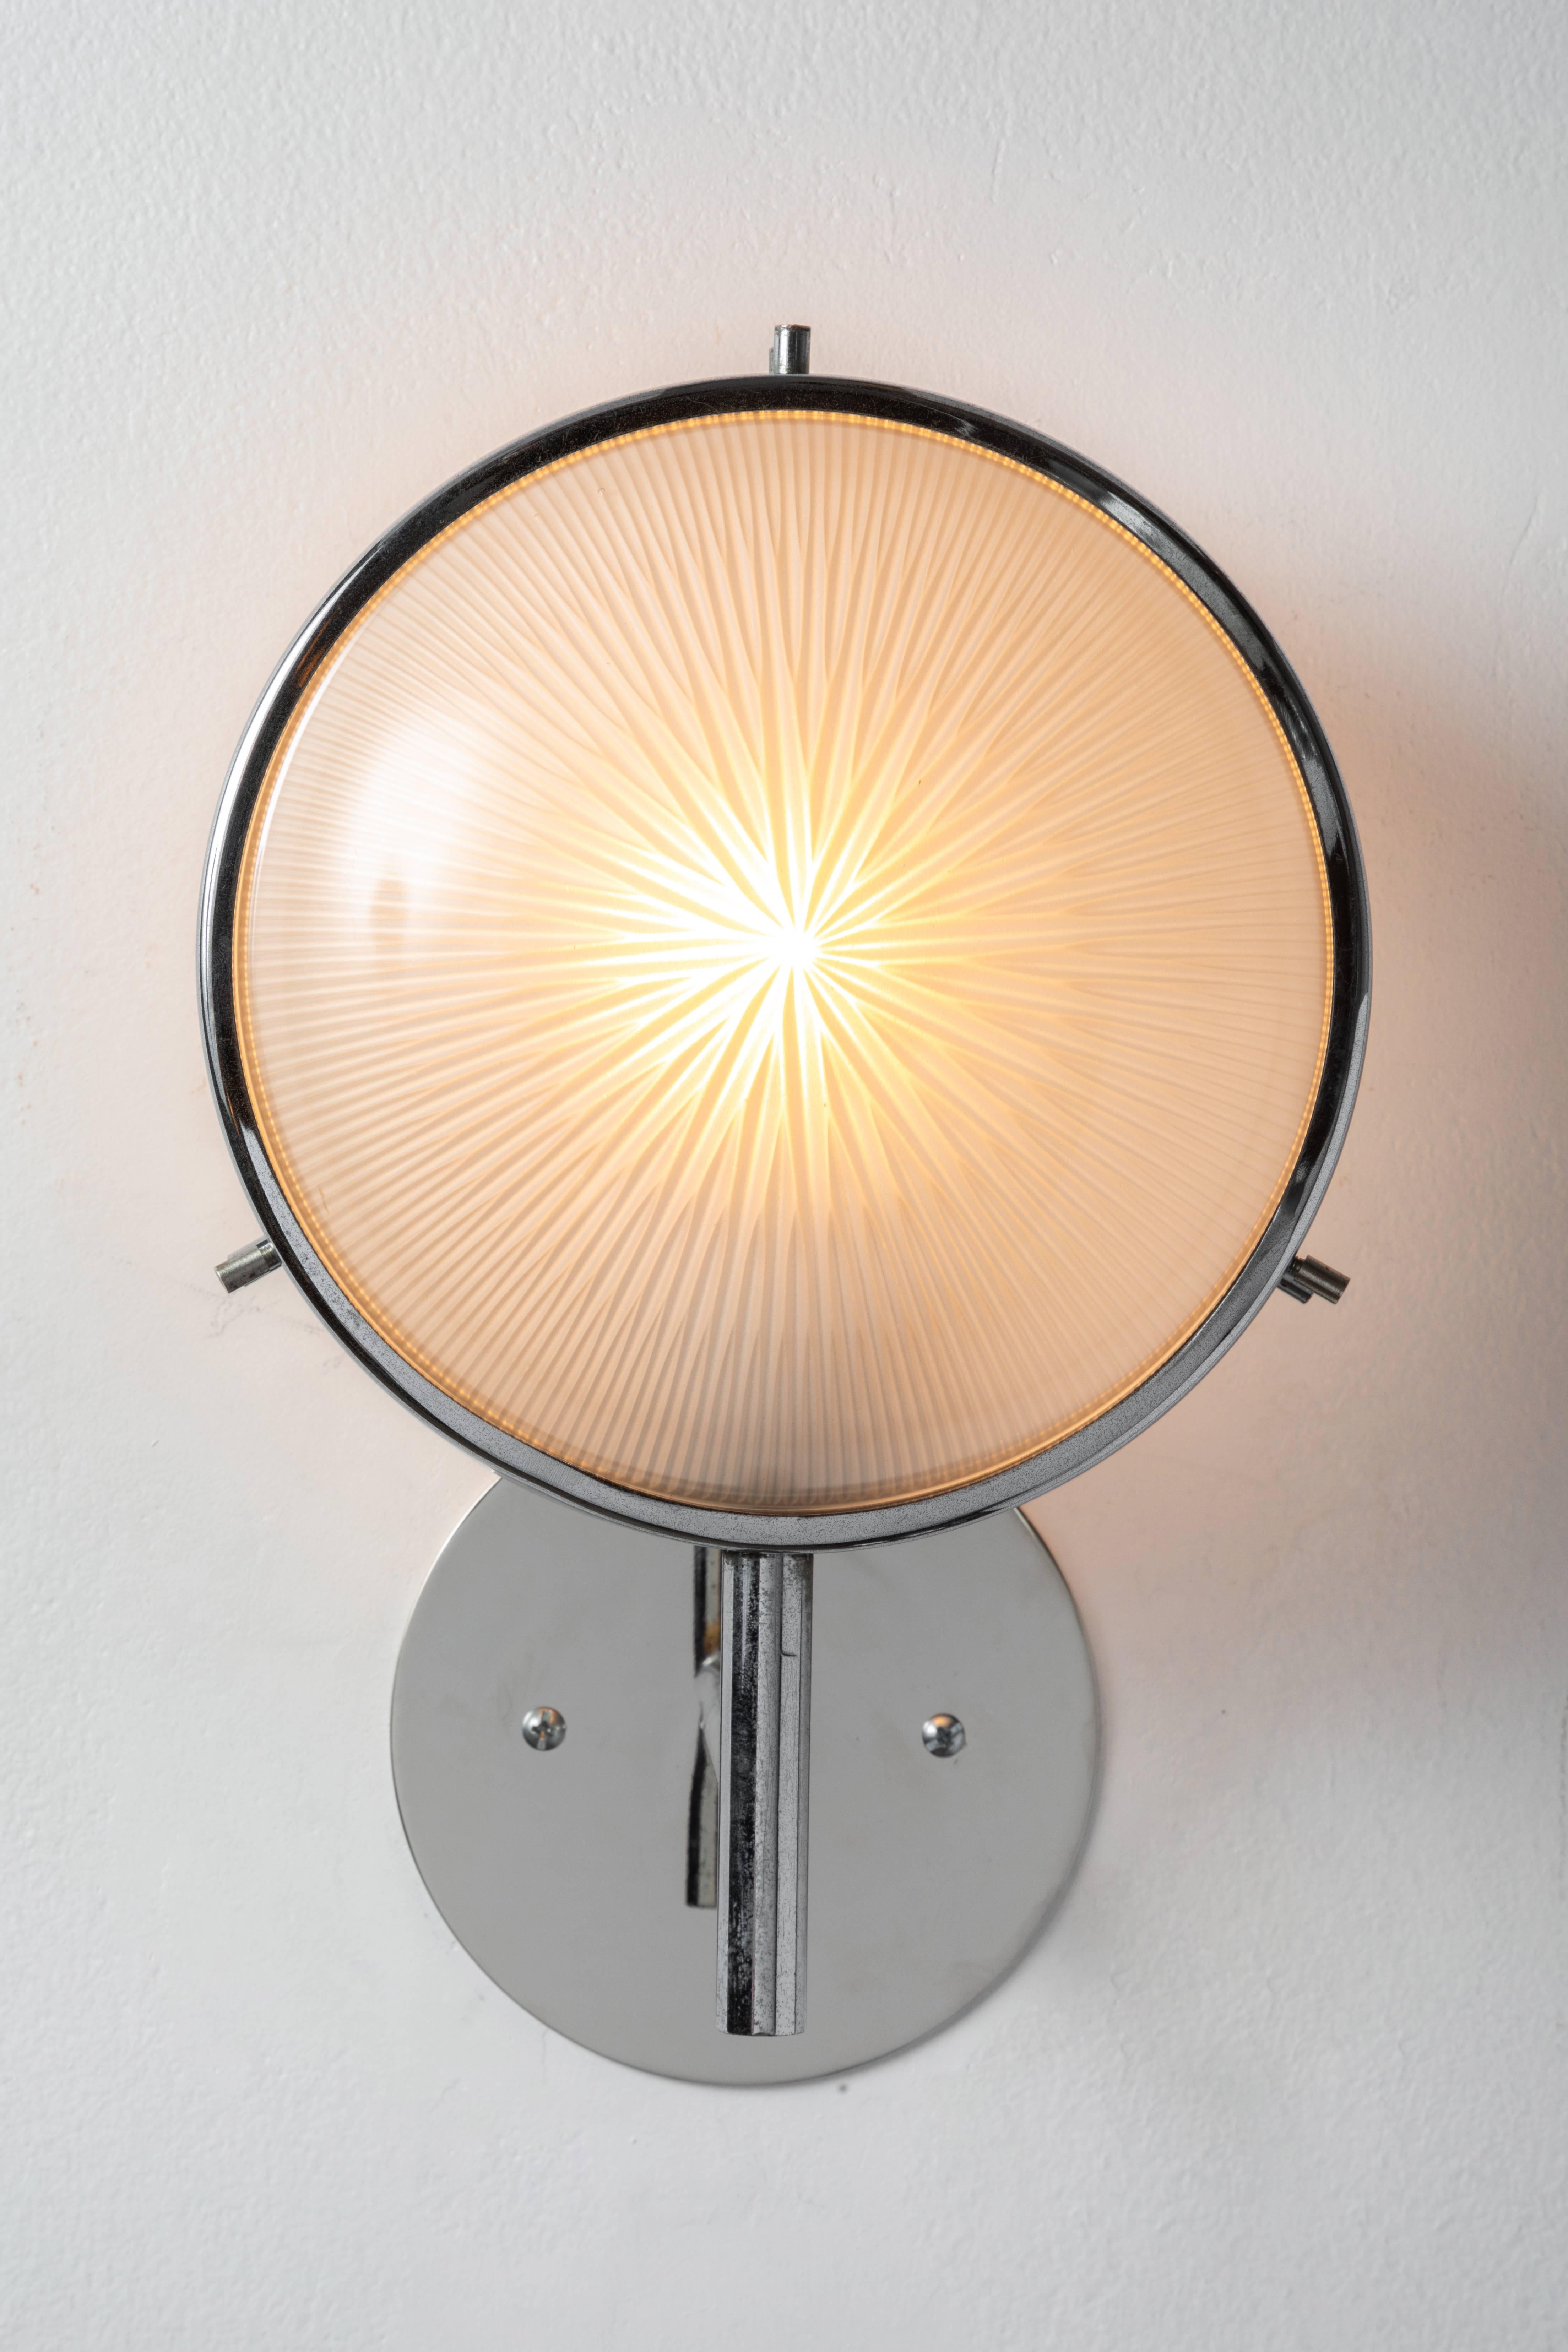 1960s Studio B.B.P.R glass and metal sconce. Executed in polished nickel, painted metal and pressed glass. Lamp freely rotates left and right for a flexible variety of lighting configurations. Professionally rewired for US electrical accommodates a